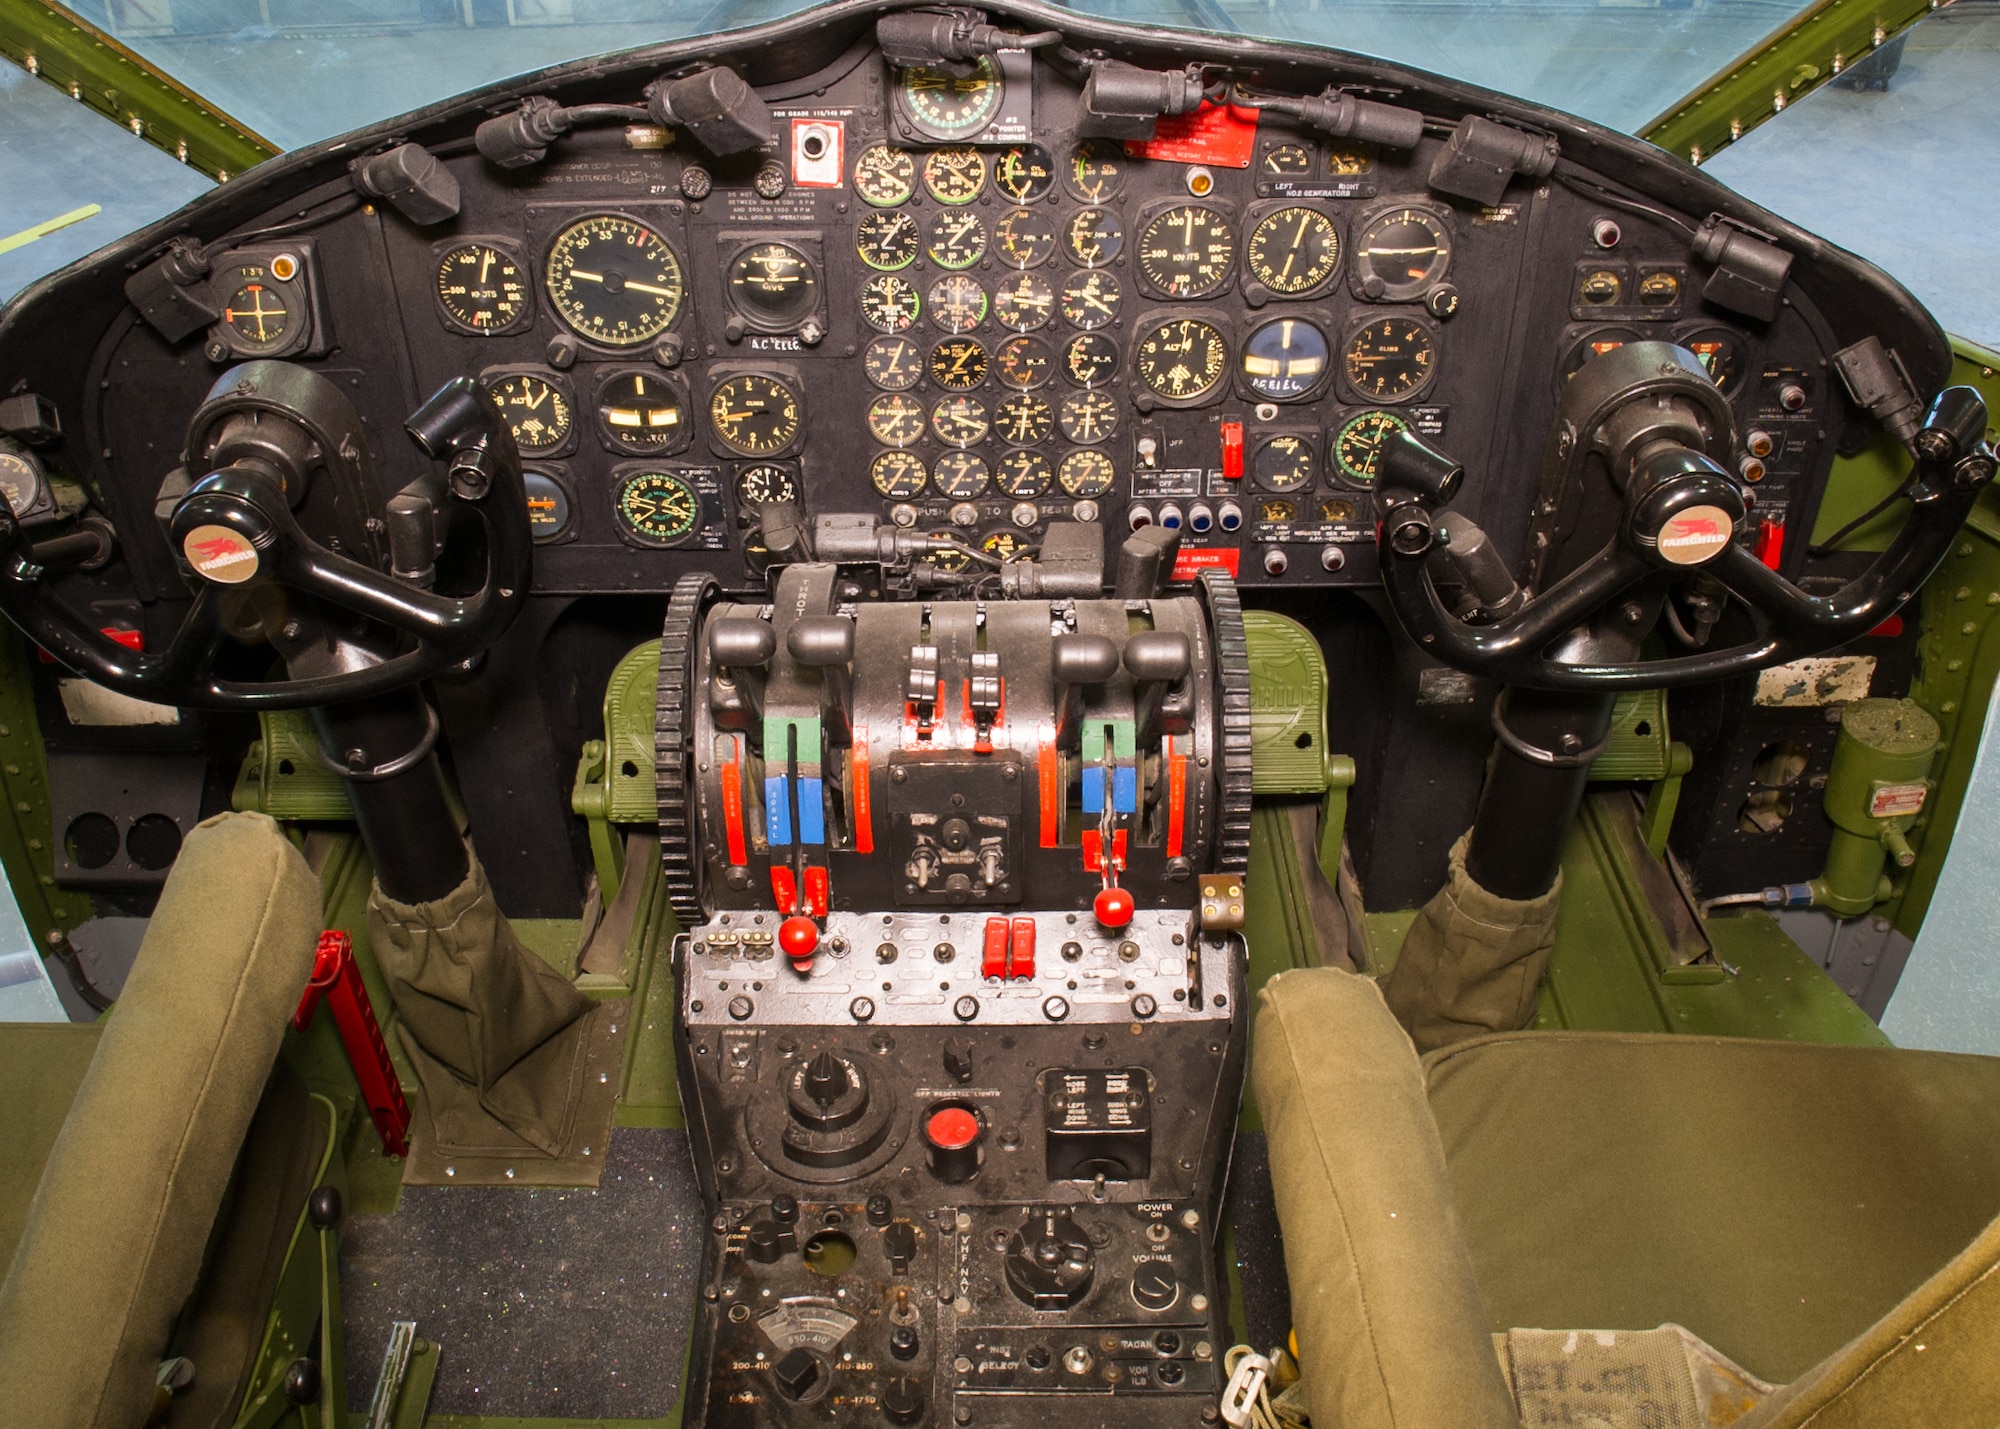 DAYTON, Ohio -- Fairchild C-119J Flying Boxcar cockpit view at the National Museum of the United States Air Force. (U.S. Air Force photo by Ken LaRock)